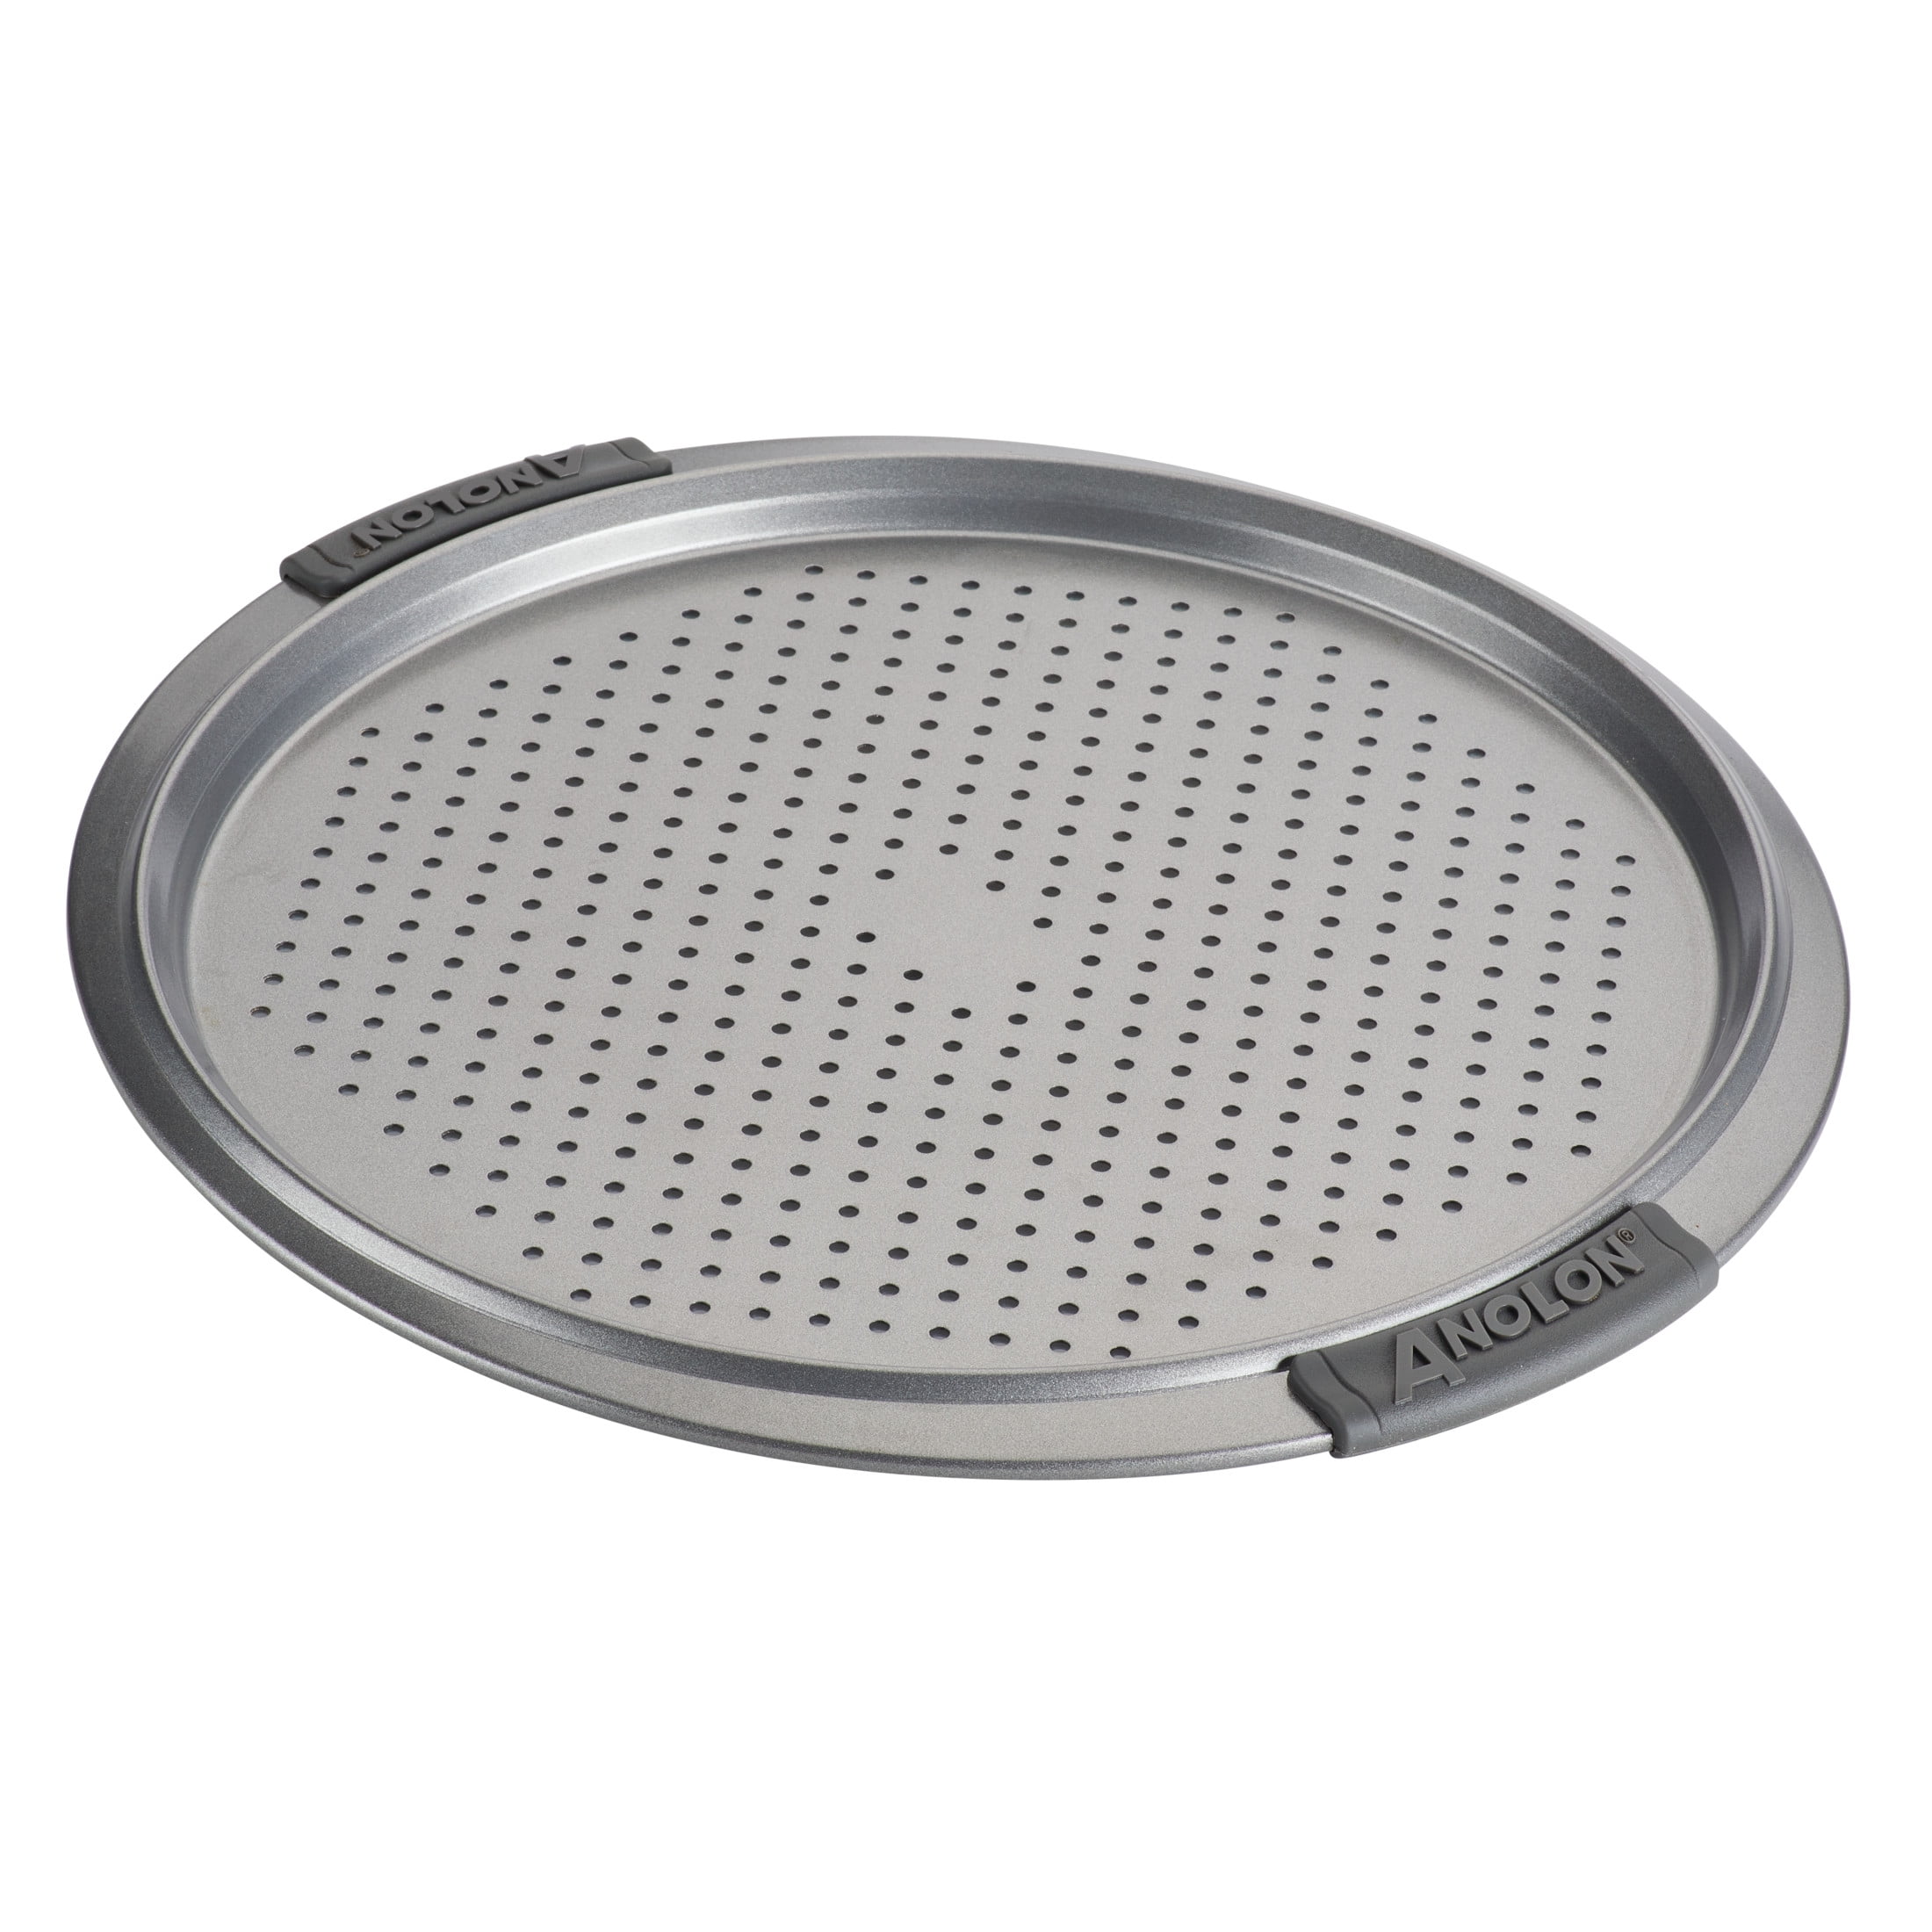 14-Inch Aluminized Steel Perforated Pizza Pan – Anolon